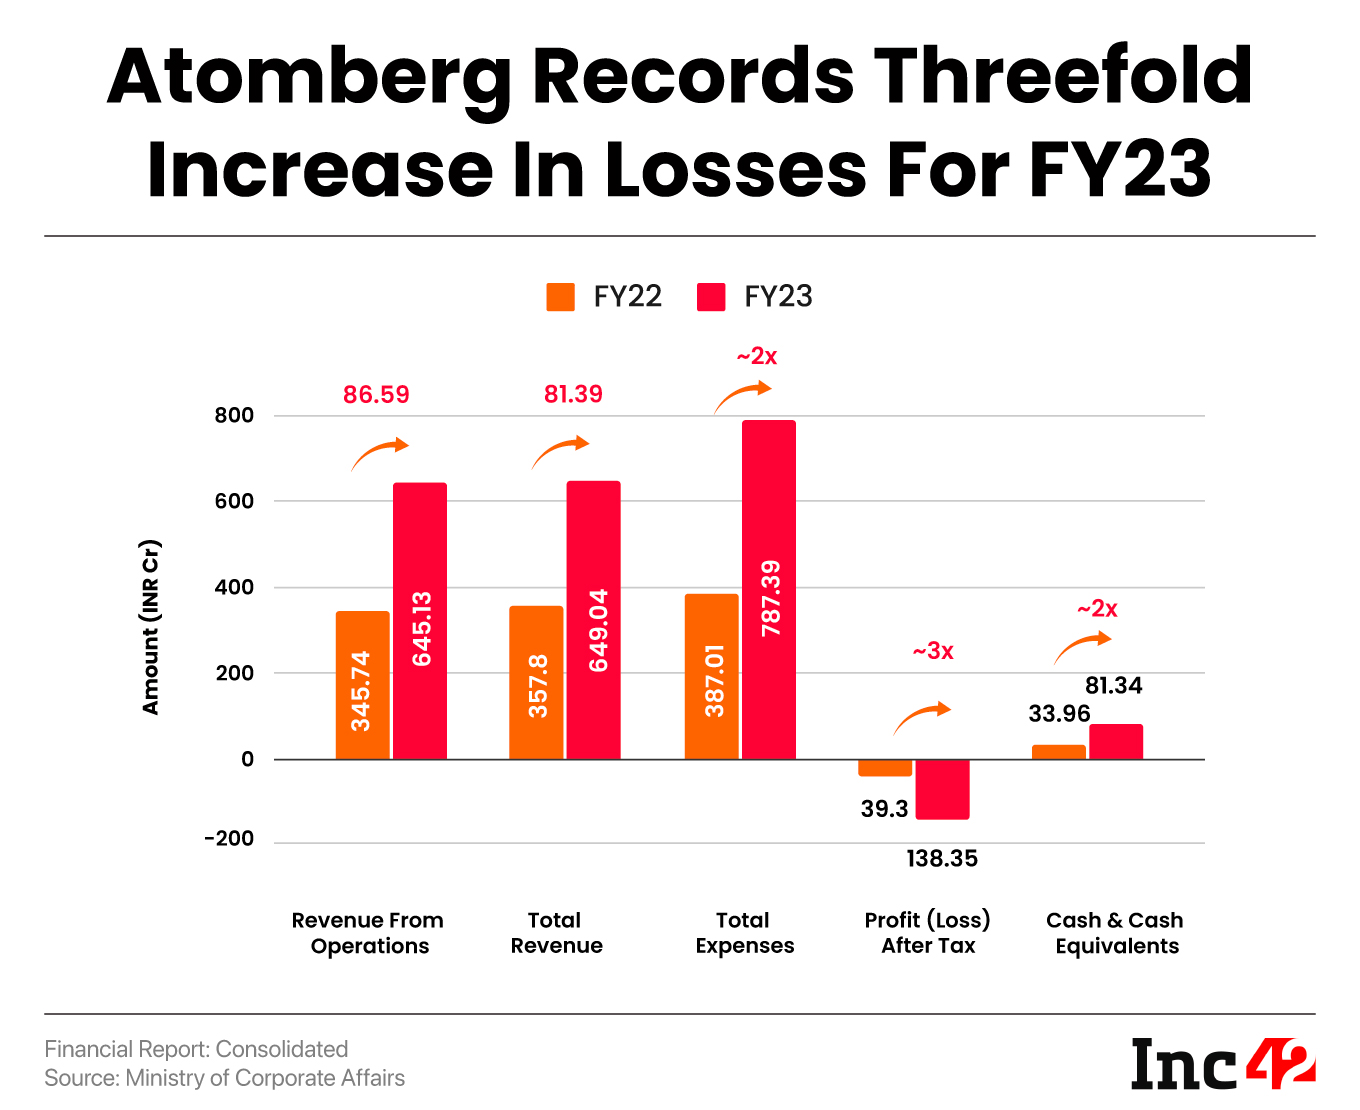 Atomberg's revenue from operations rose 86.59% to INR 645.13 Cr in FY23 from INR 345.74 Cr in FY22